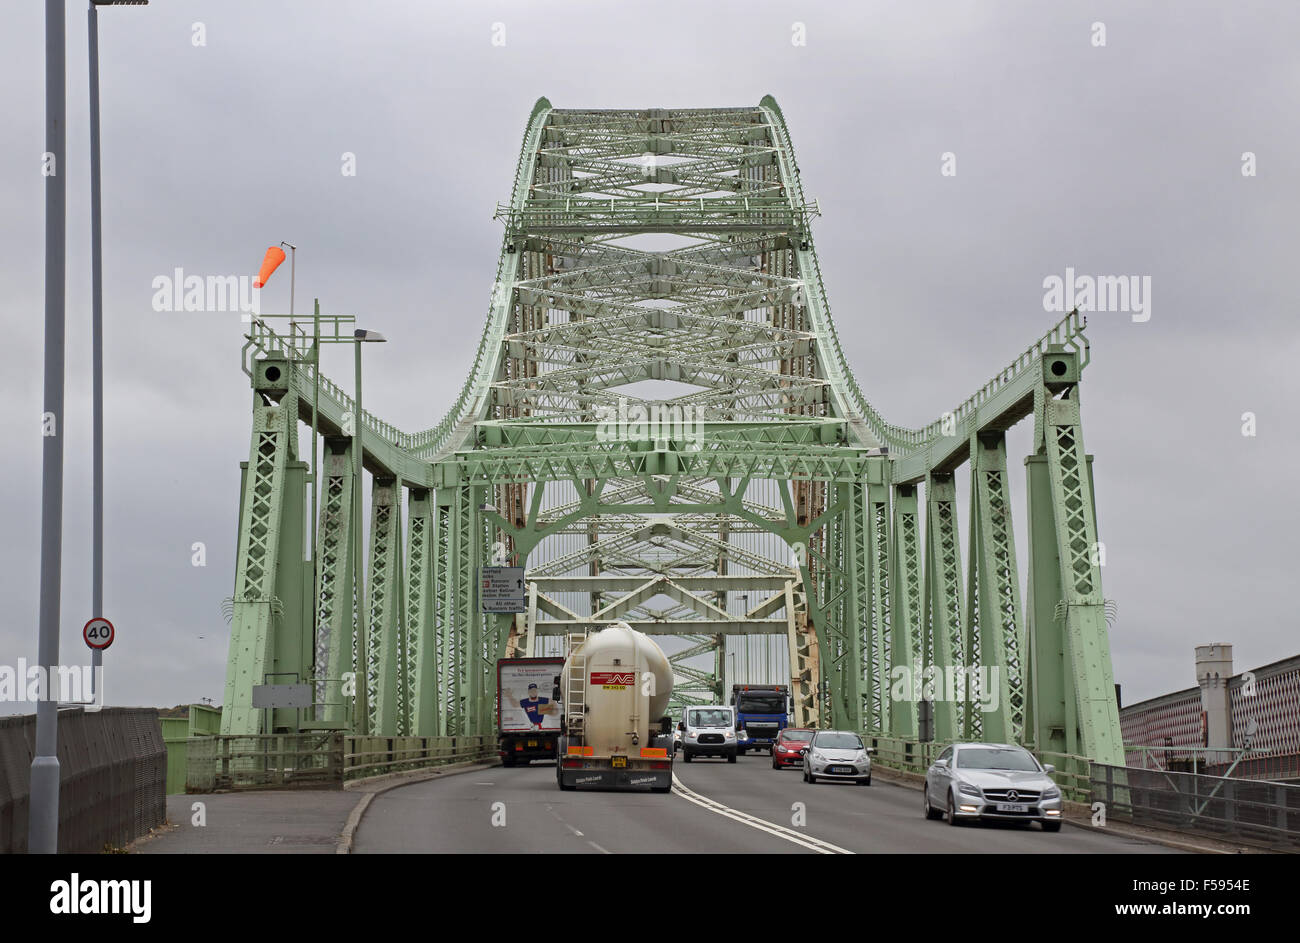 Traffic crossing the Silver Jubilee bridge over the River Mersey in Runcorn, UK. Bridge viewed from the north. Stock Photo